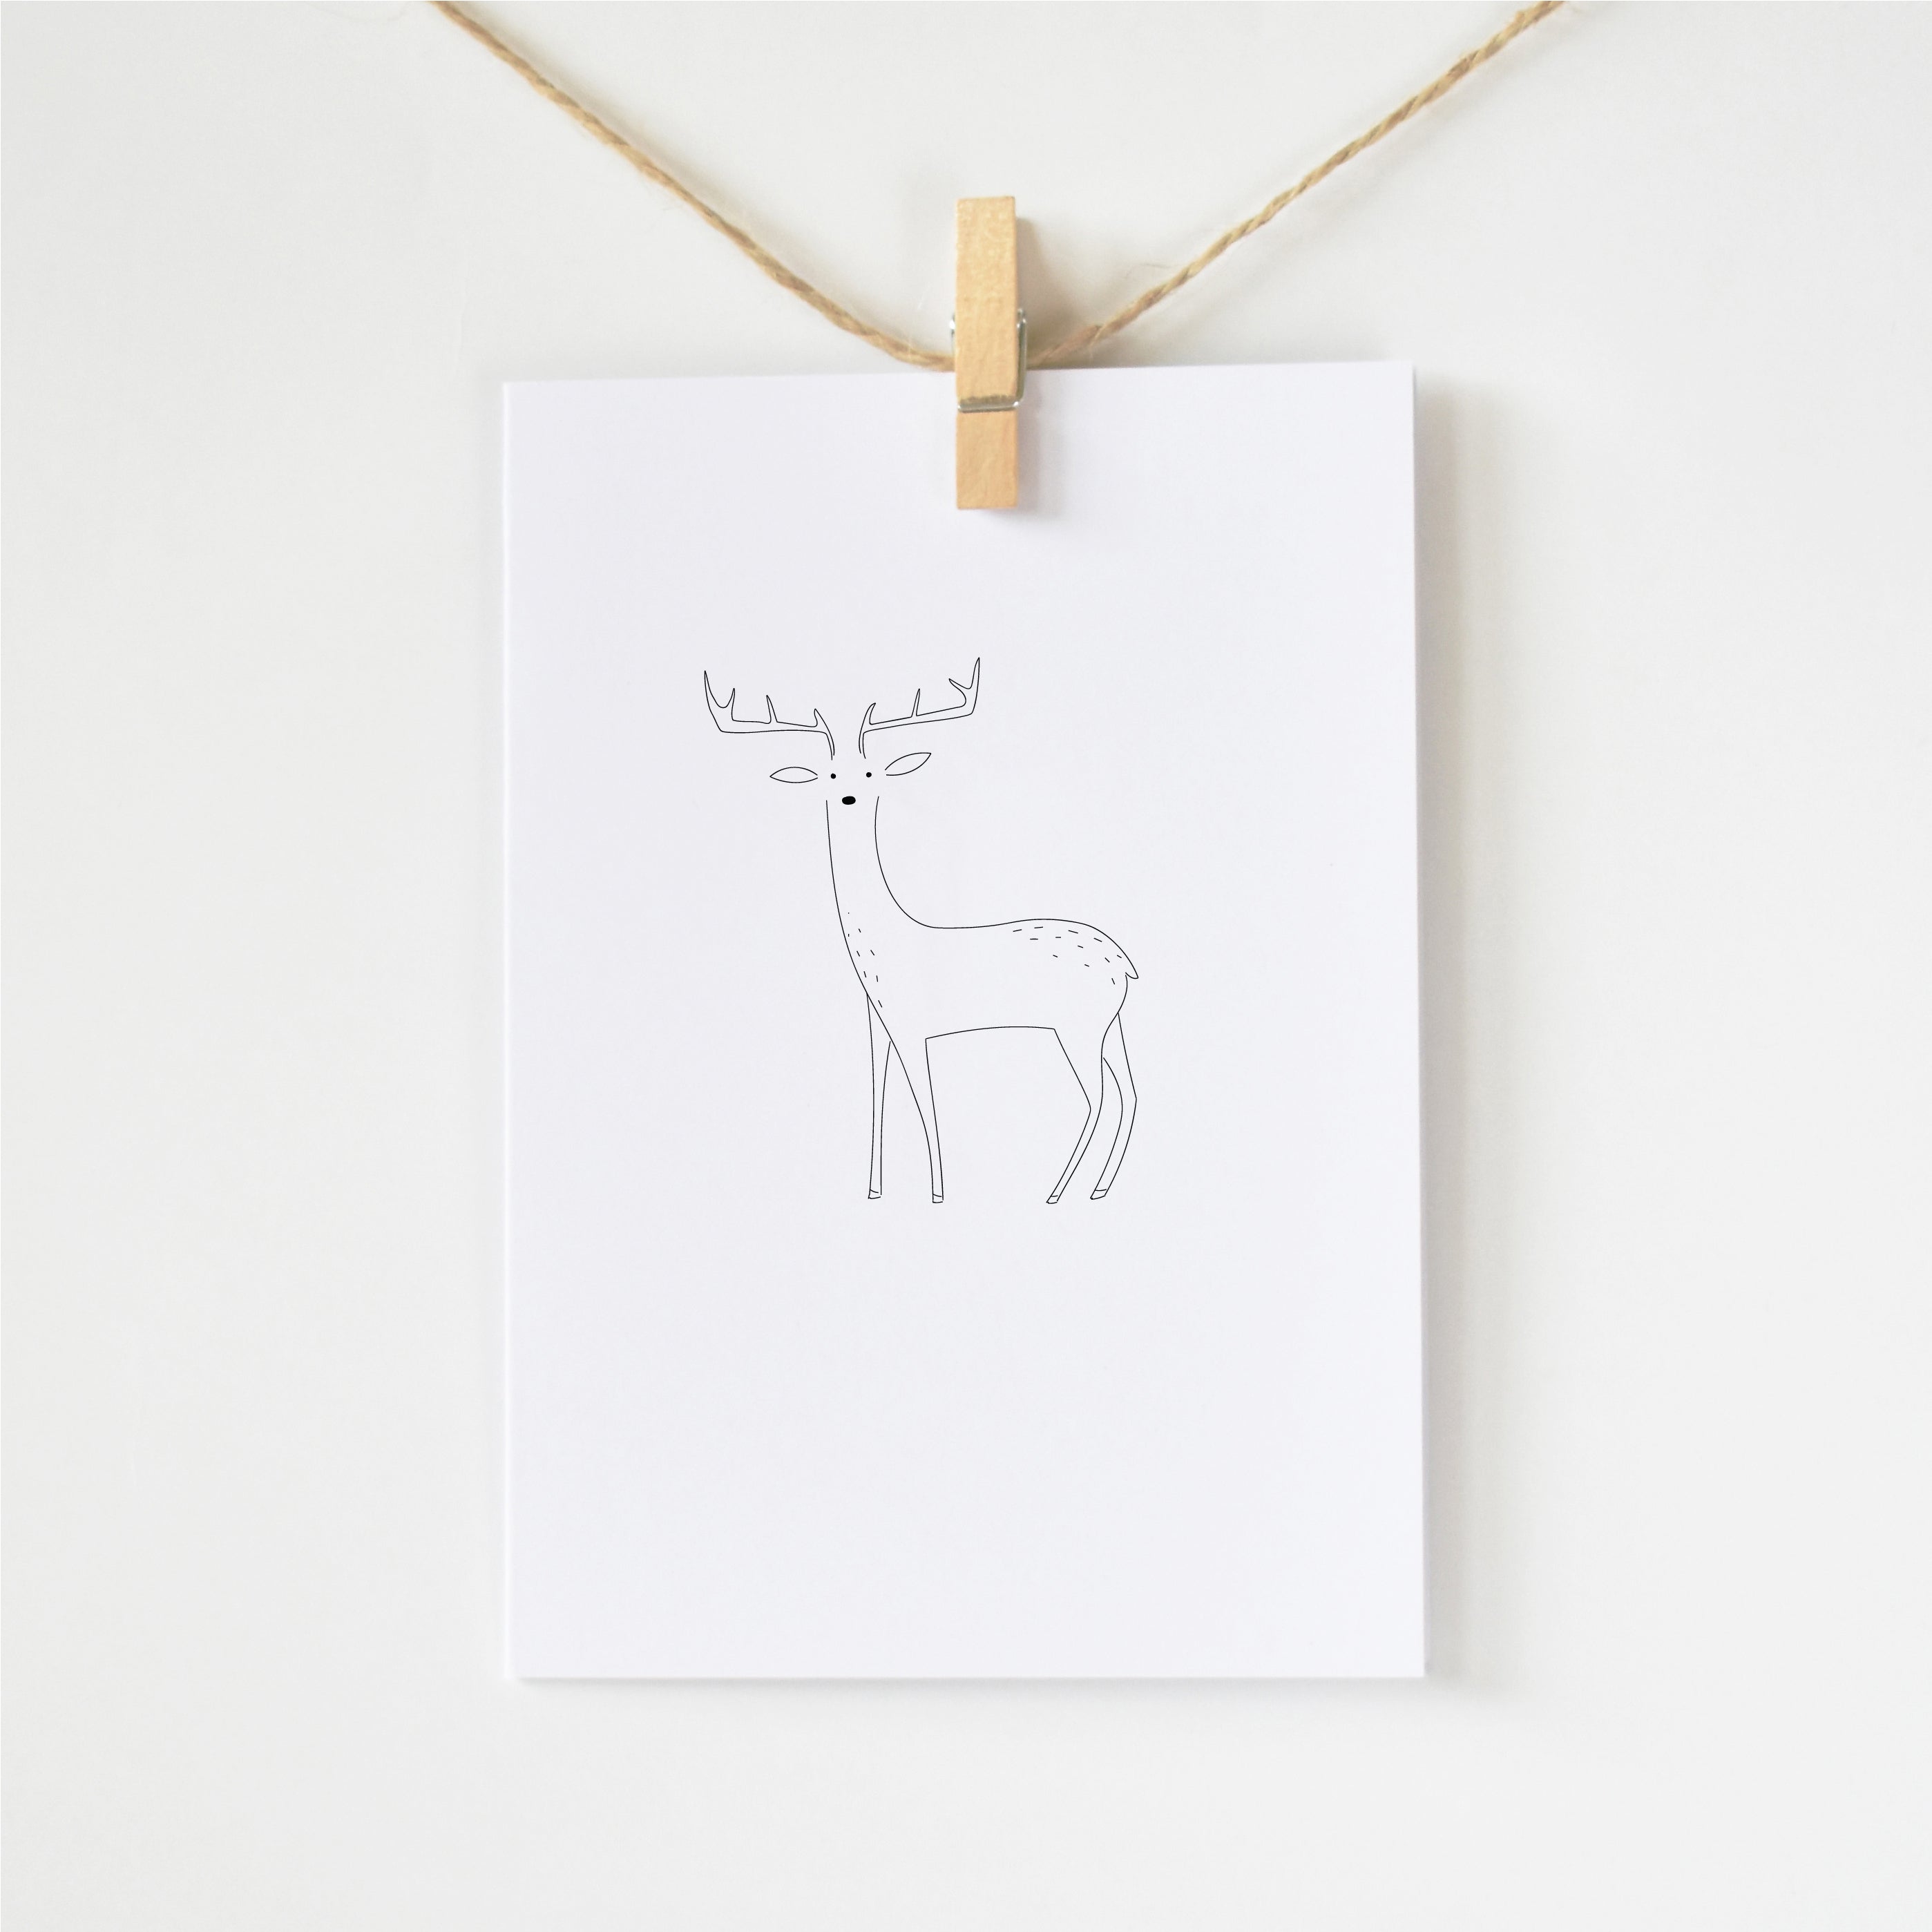 Pack of 5 Minimalist Christmas cards